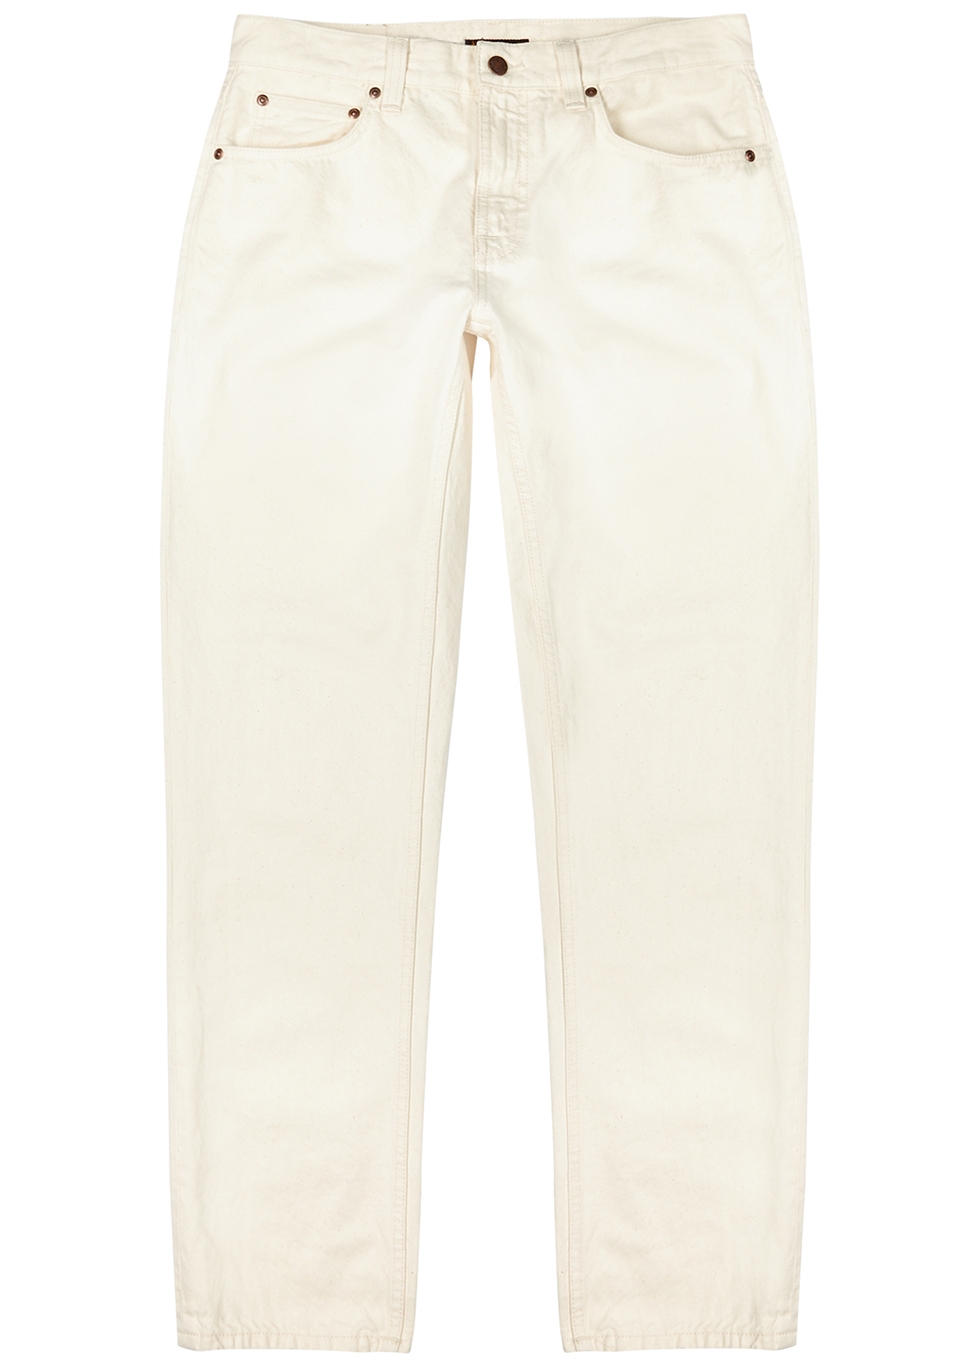 Nudie Jeans Gritty Jackson off-white straight-leg jeans - Harvey Nichols